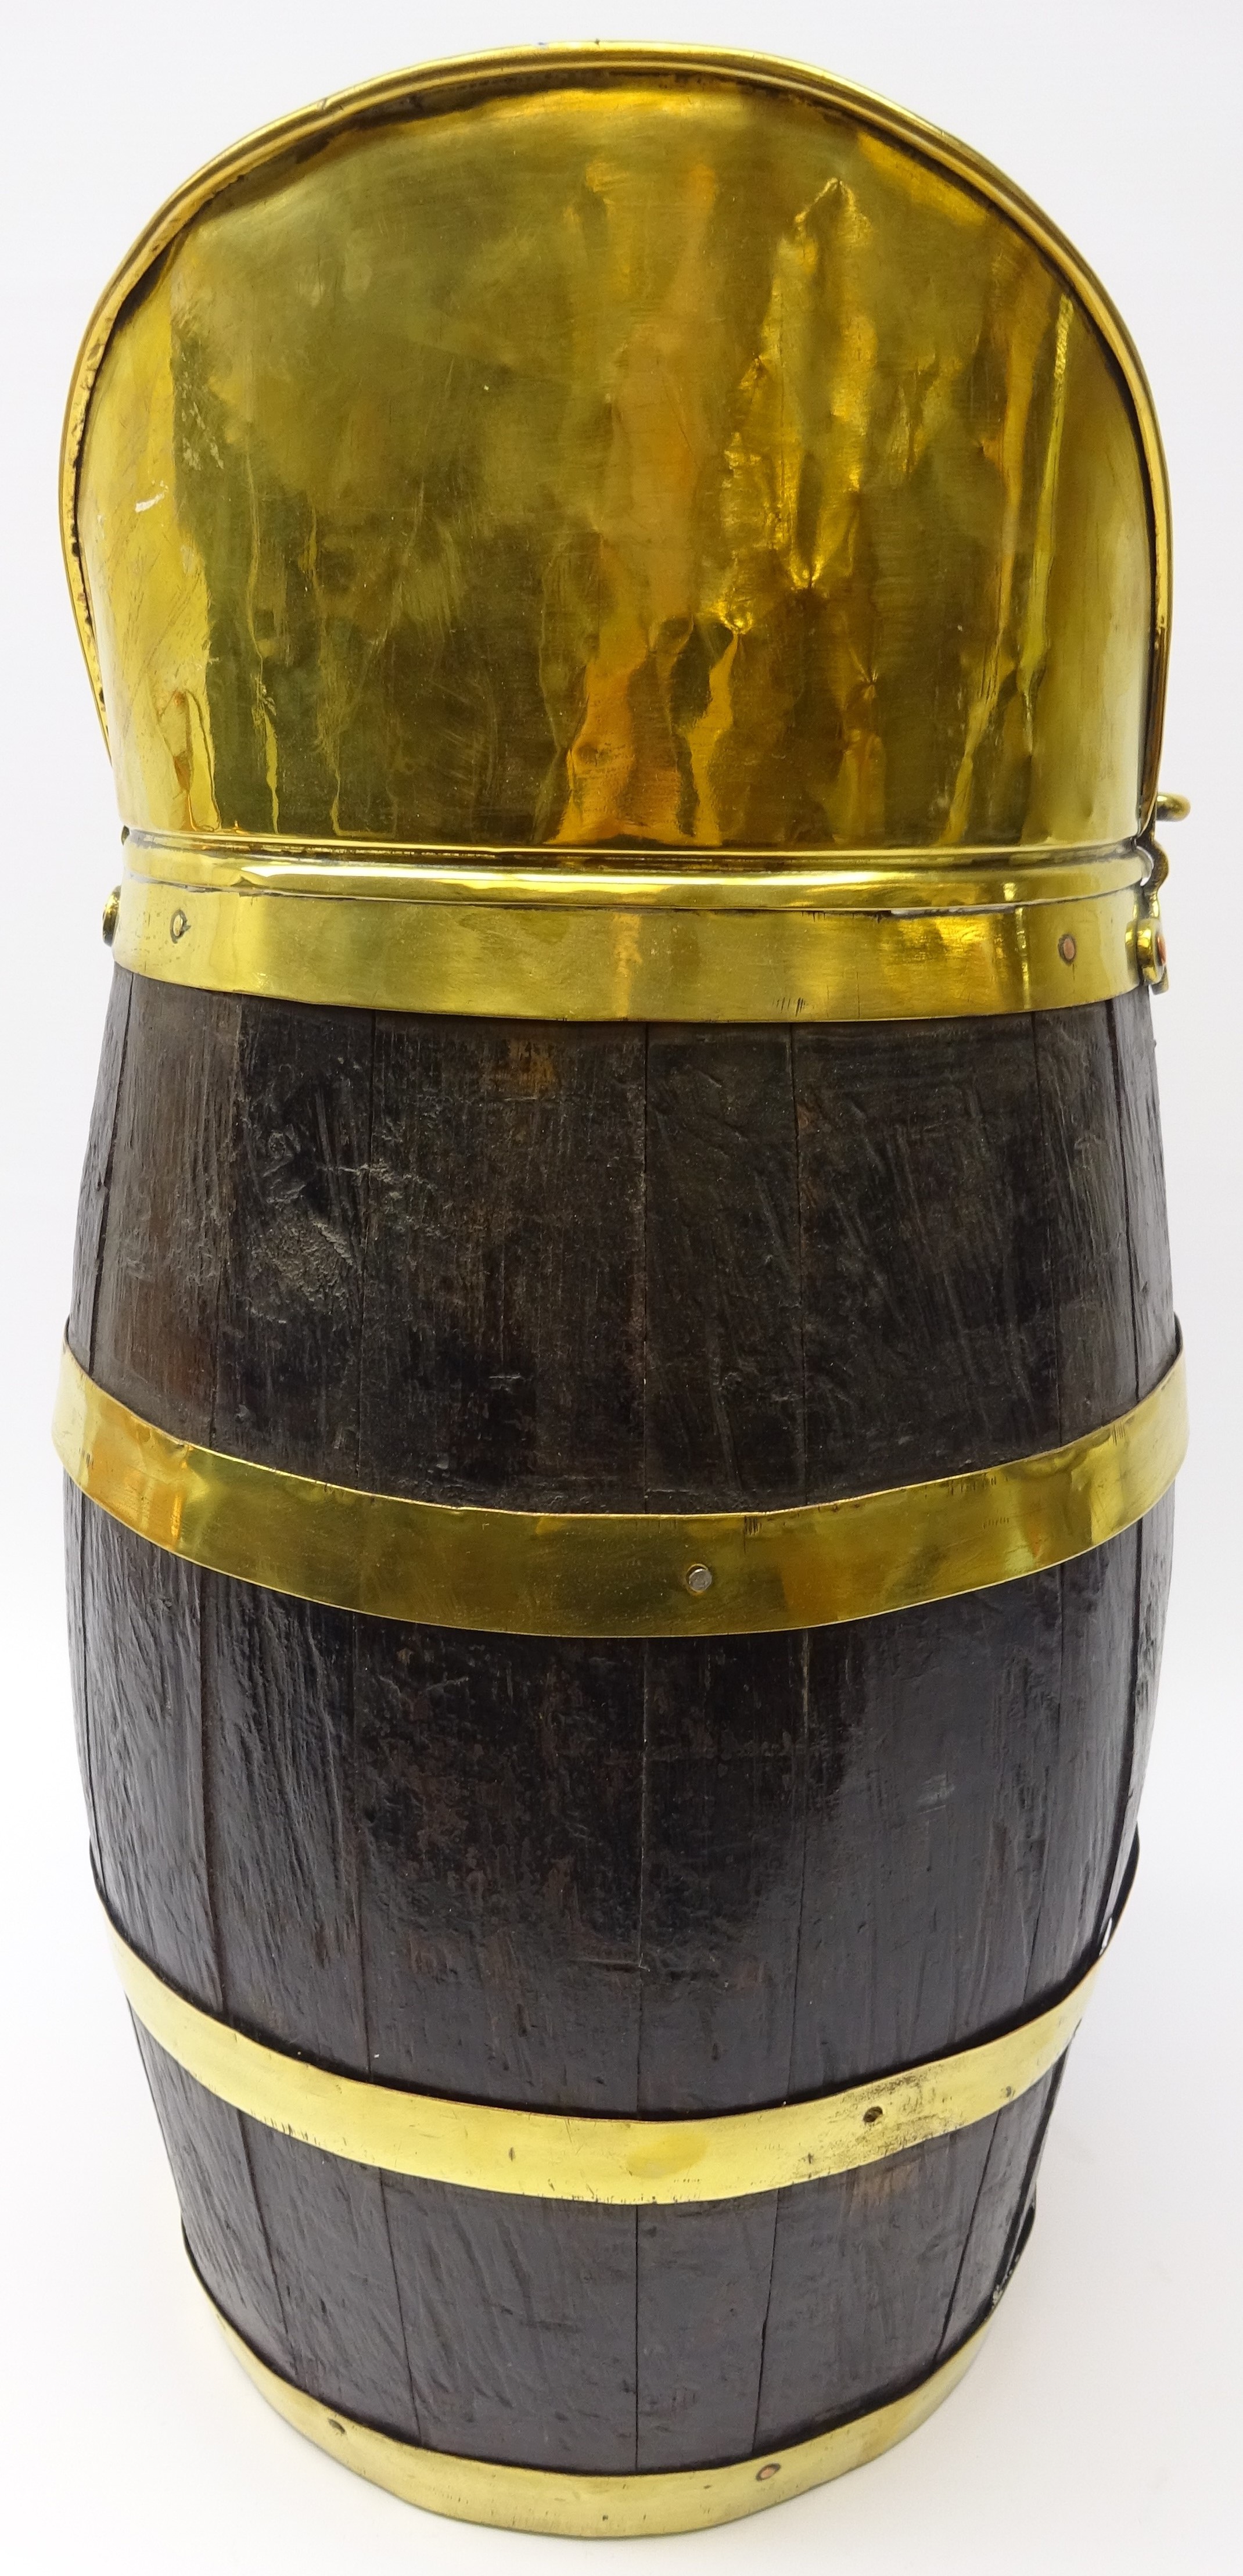 Early 20th century brass coopered oak coal barrel with brass swing handle and spout, - Image 3 of 3